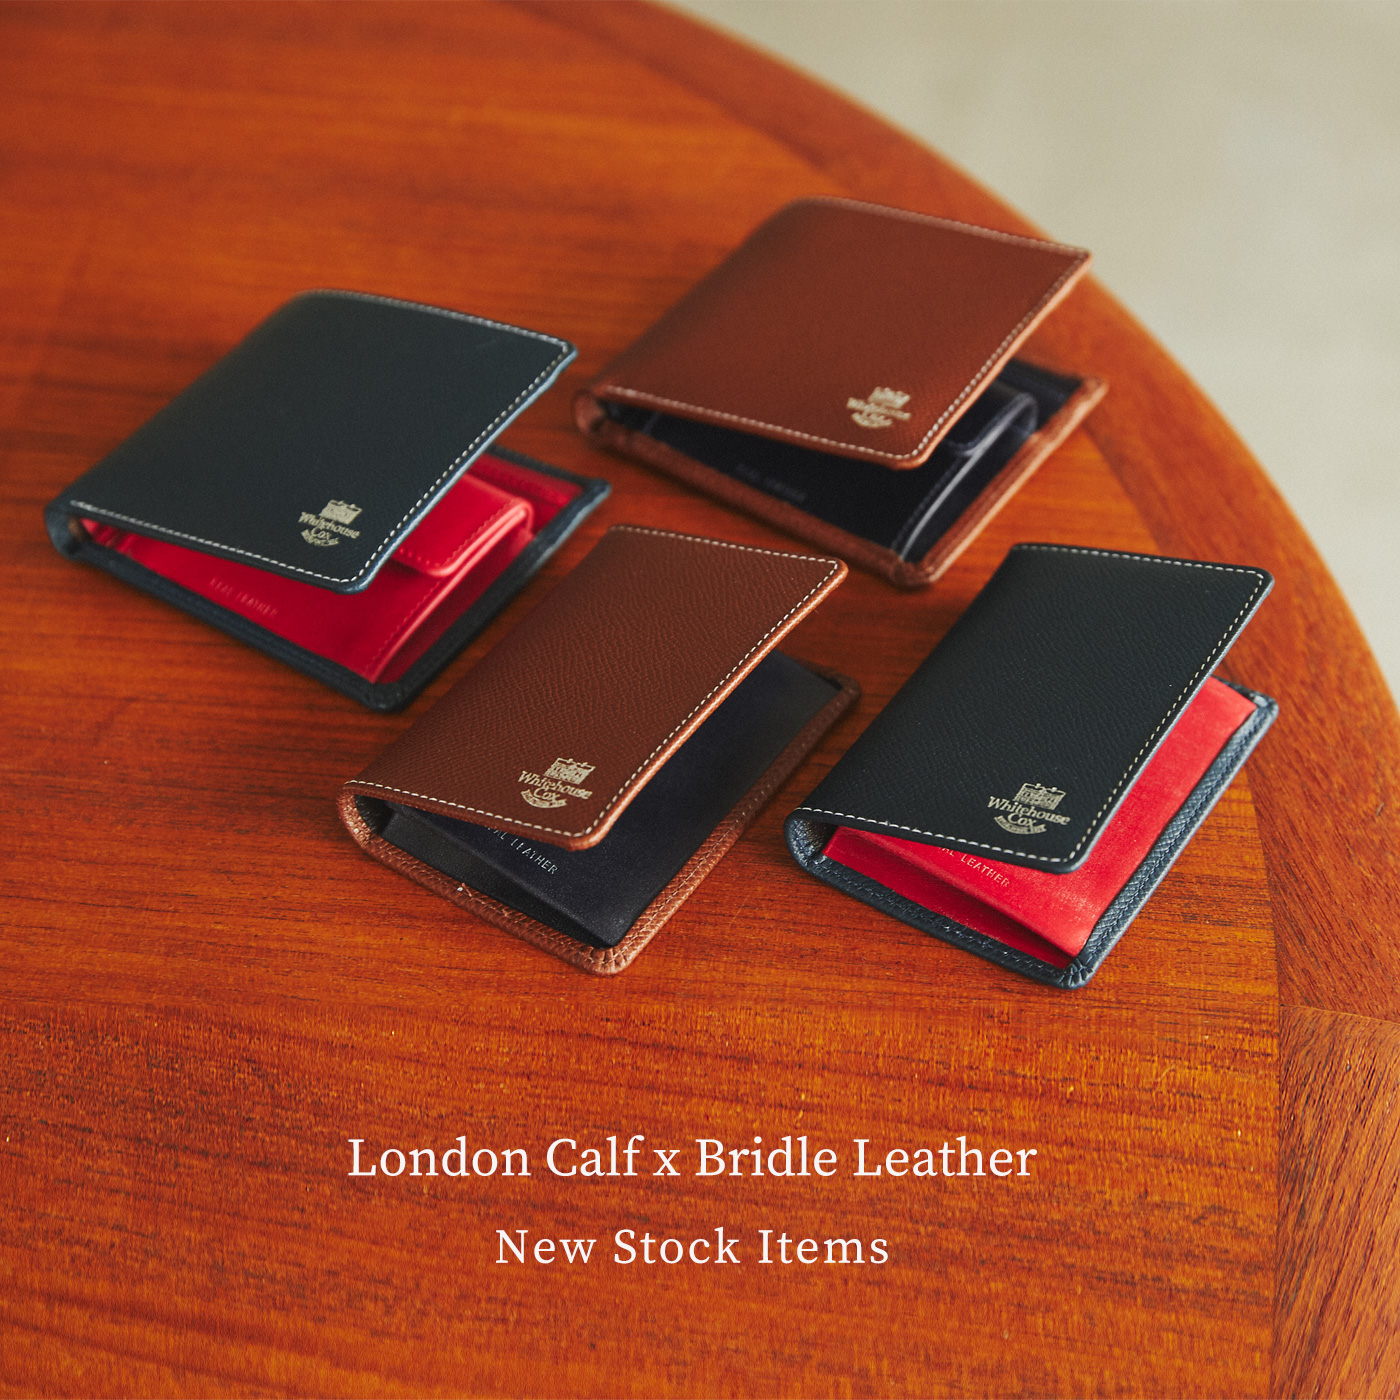 Whitehouse Cox – London Calf x Bridle Leather Collection – New Stock Items